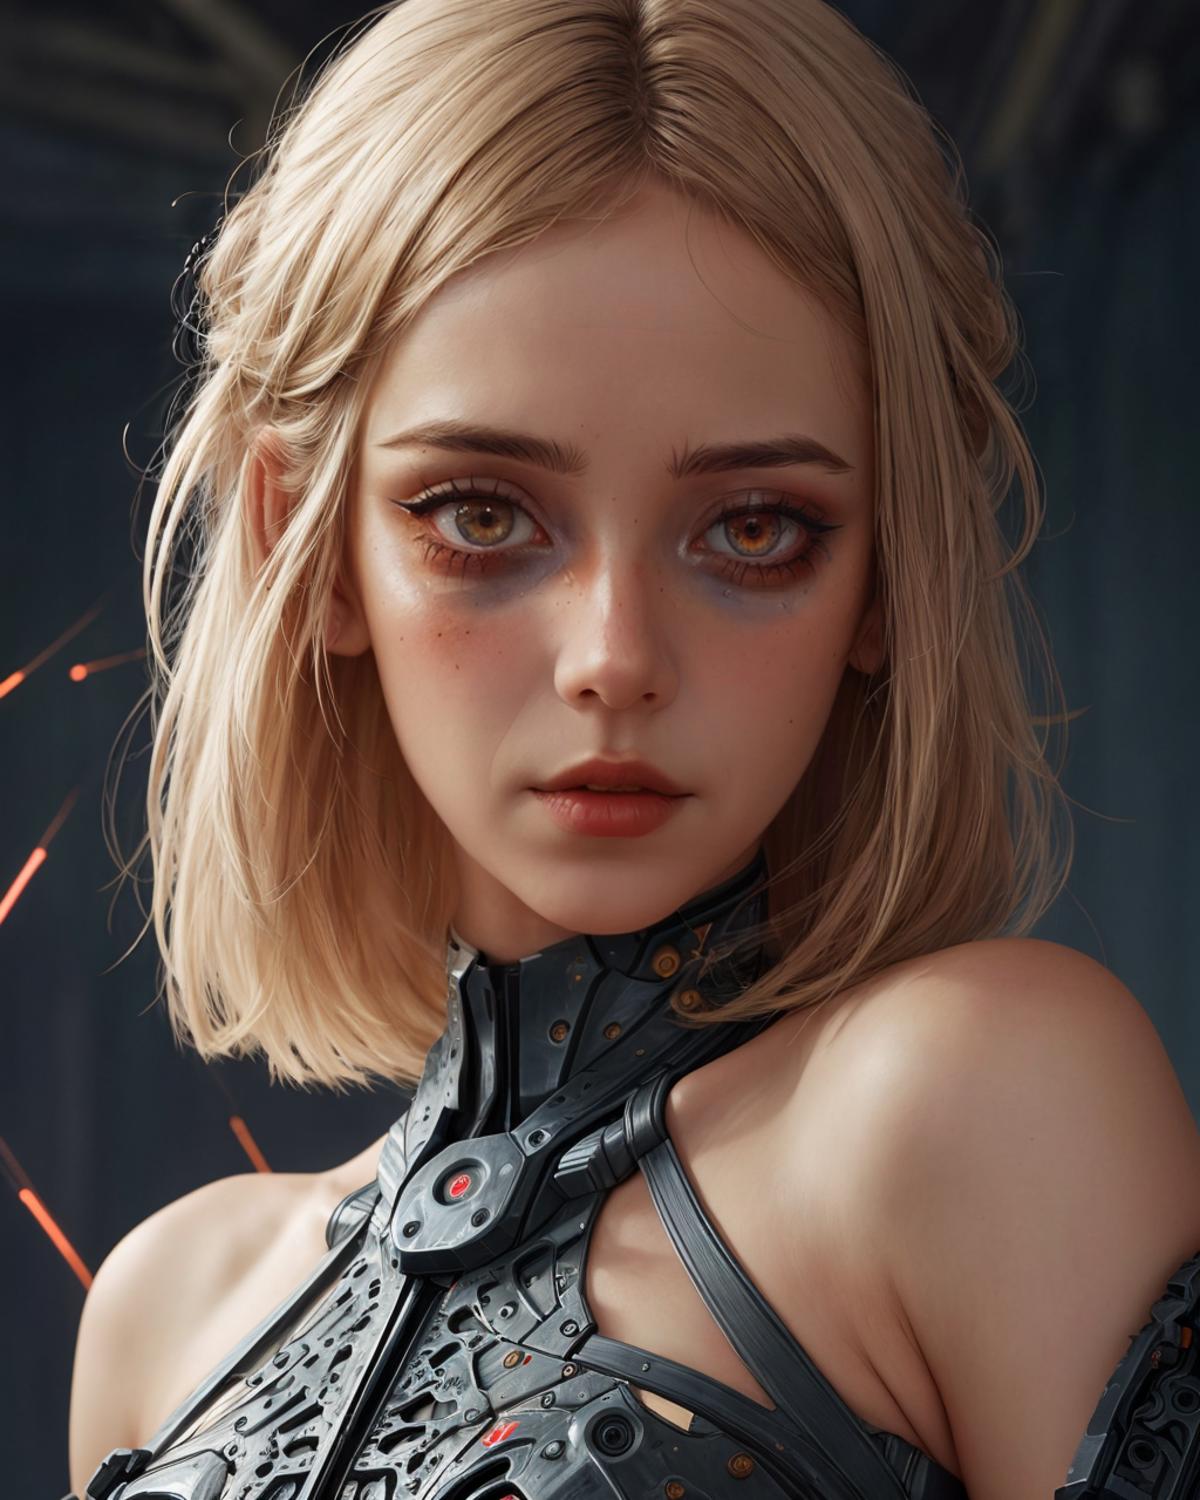 A beautiful blonde woman with a cyberpunk-inspired outfit and unique makeup.